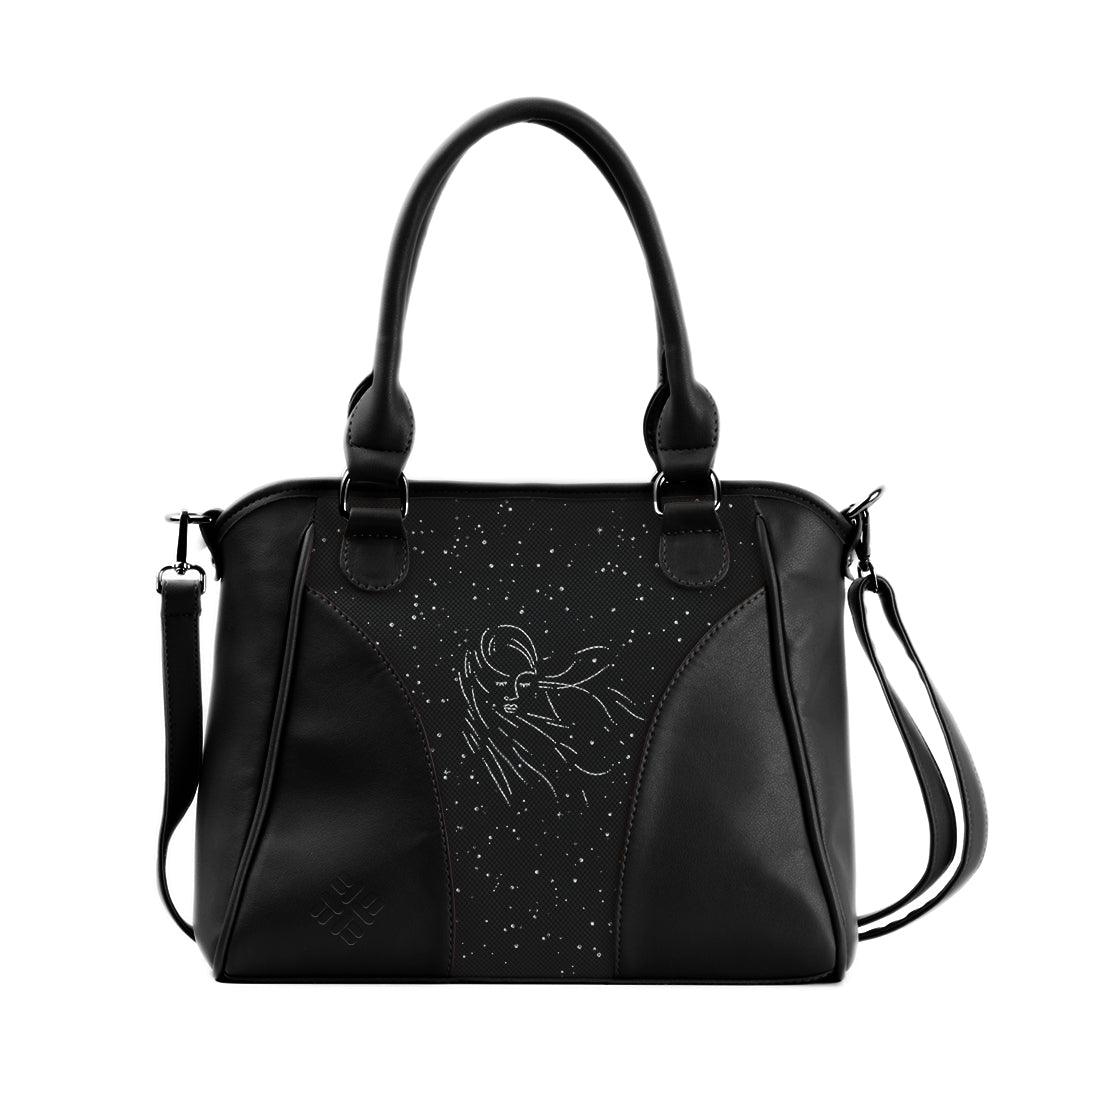 Black Ladies Handbag Lucy in the sky - CANVAEGYPT